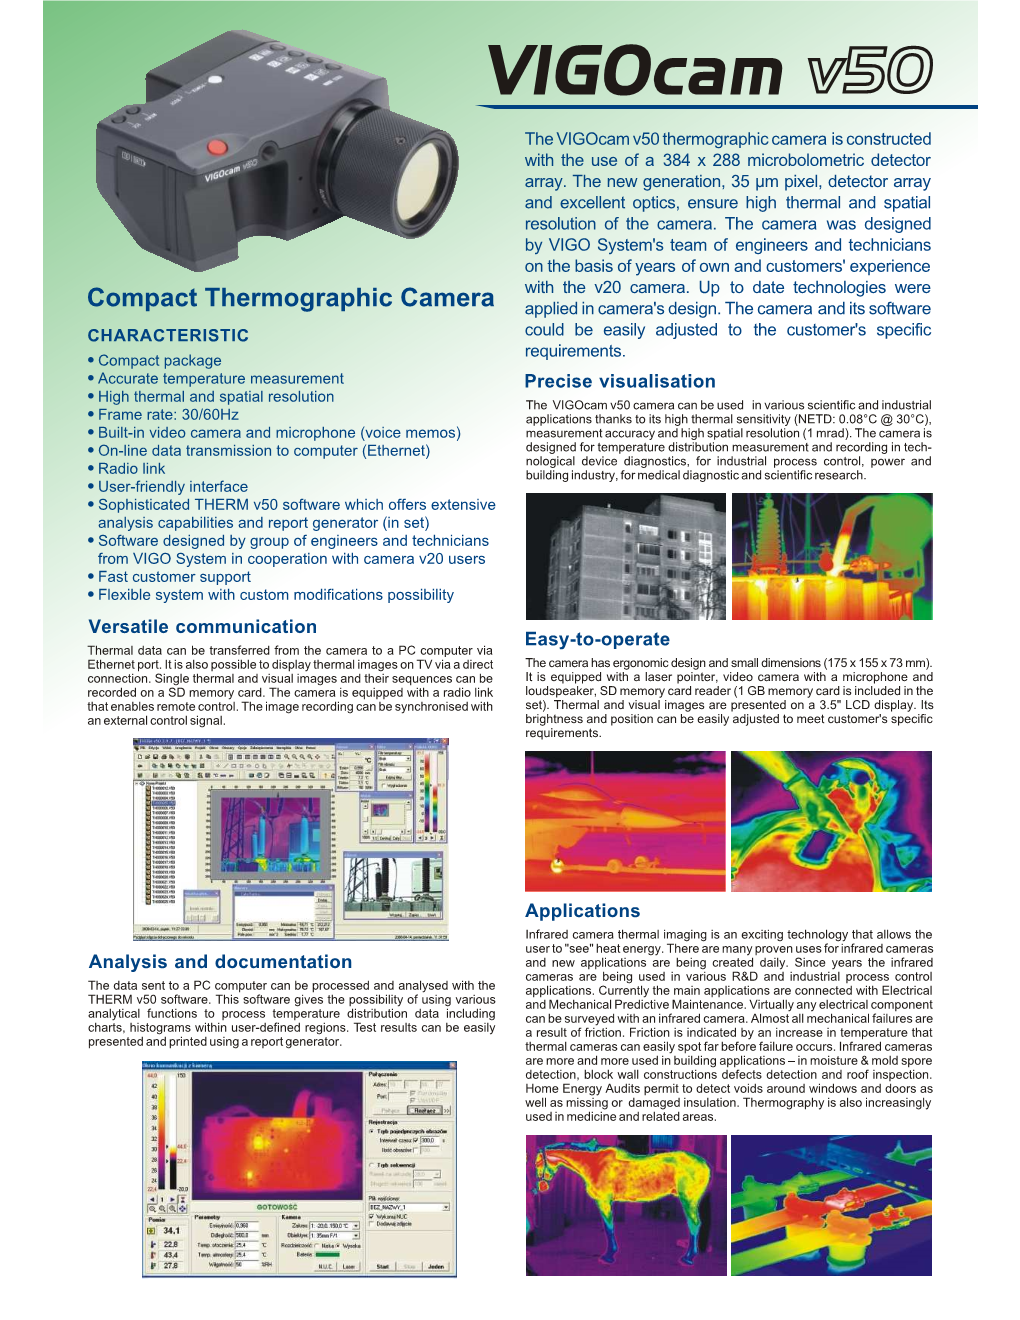 Compact Thermographic Camera Applied in Camera's Design